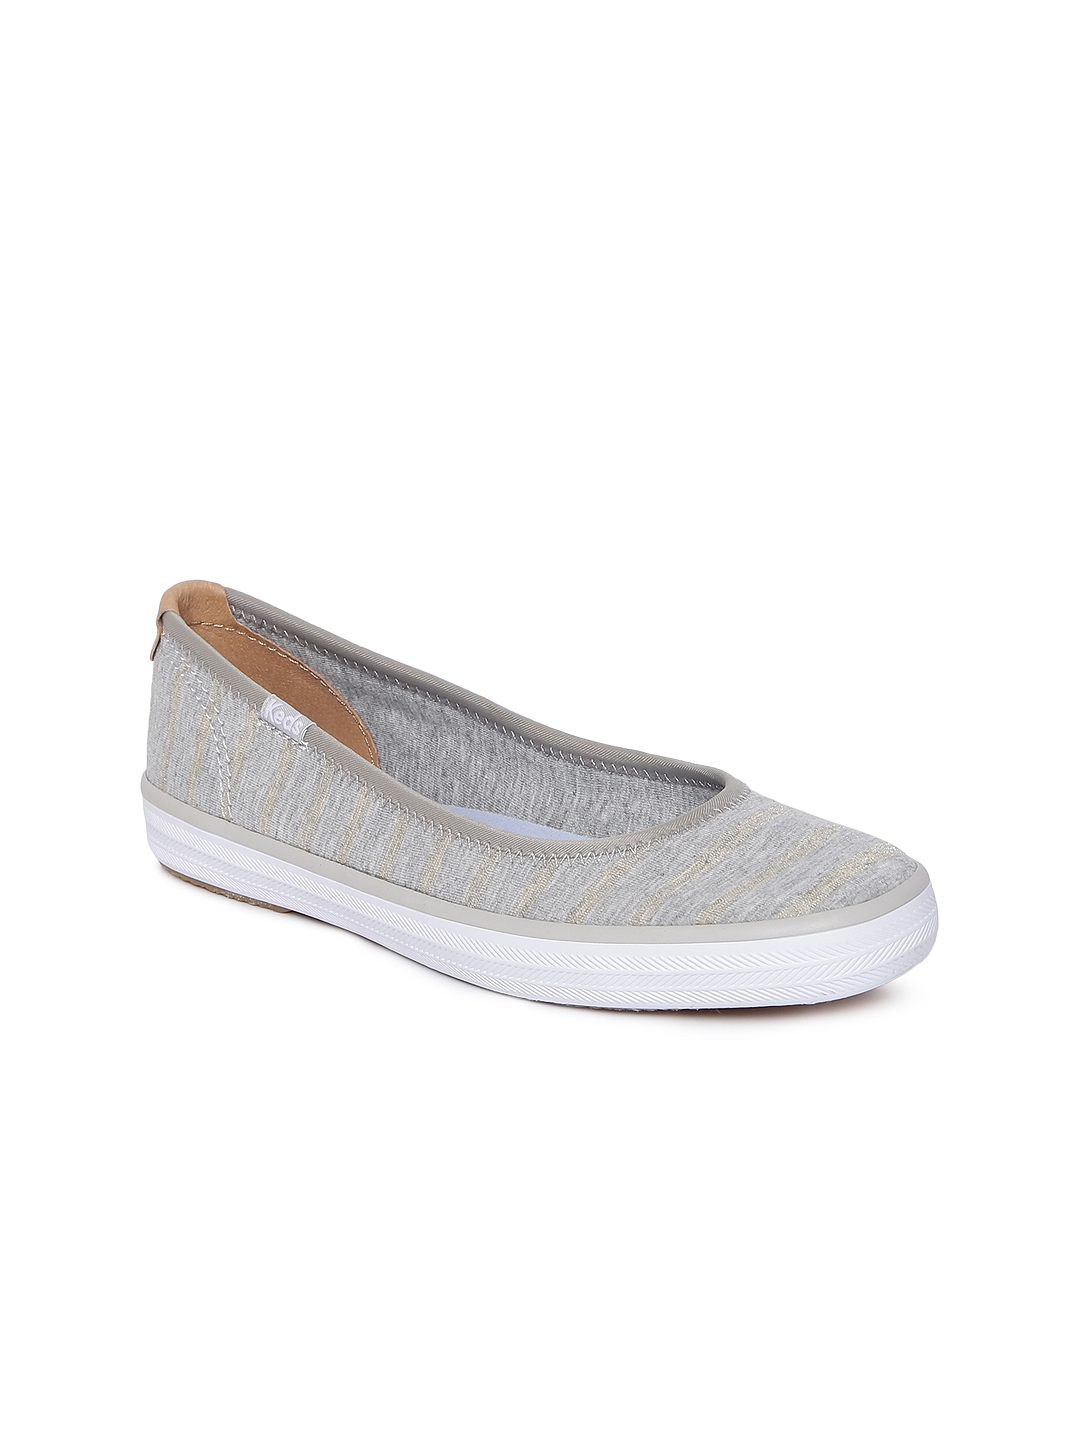 Buy Keds Women Grey & Gold Toned Striped Slip On Sneakers - Casual ...